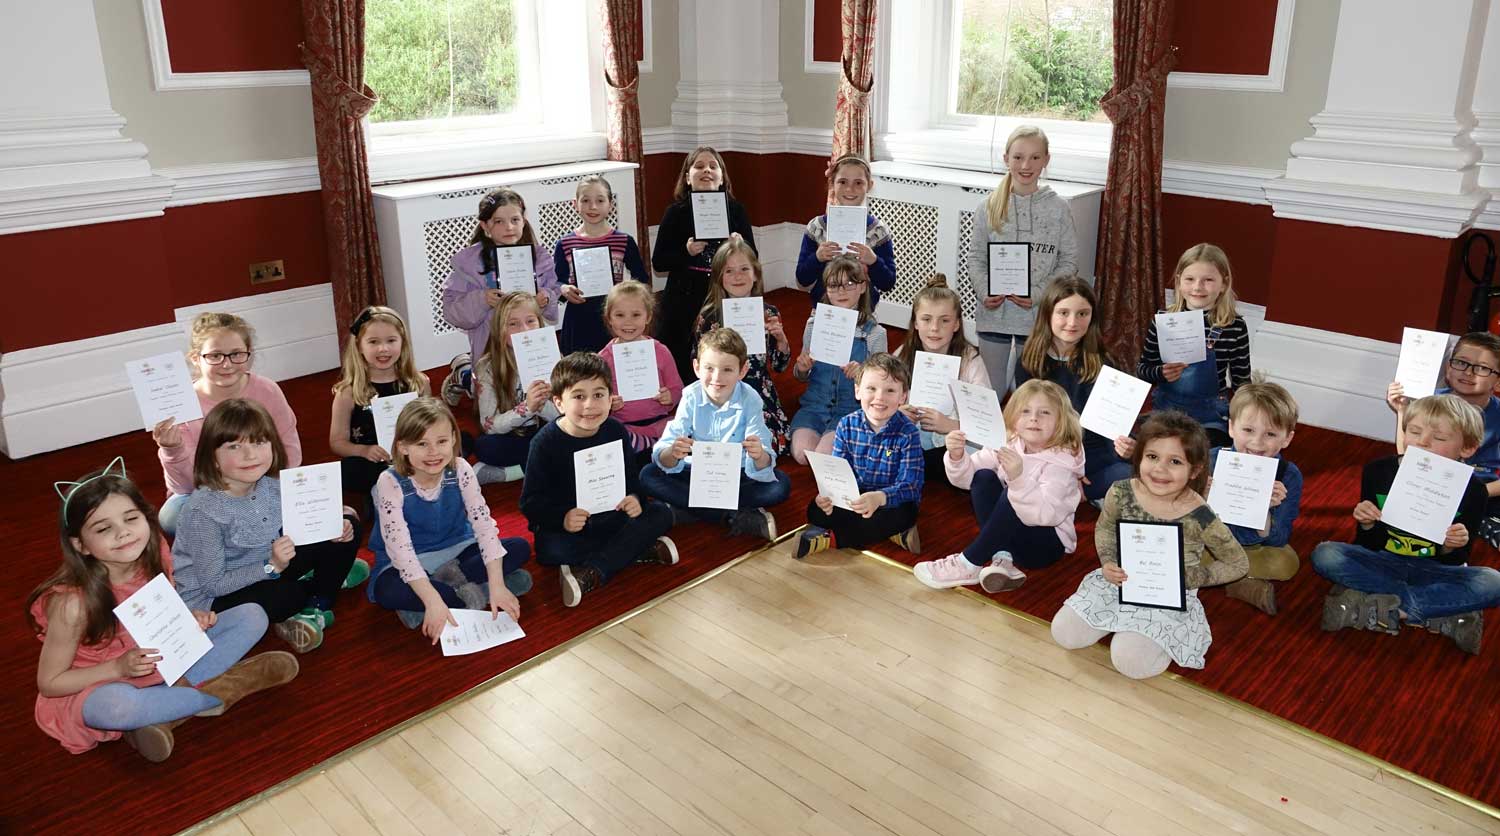 Children's in Bloom Art Awards held at The Granby Care Home